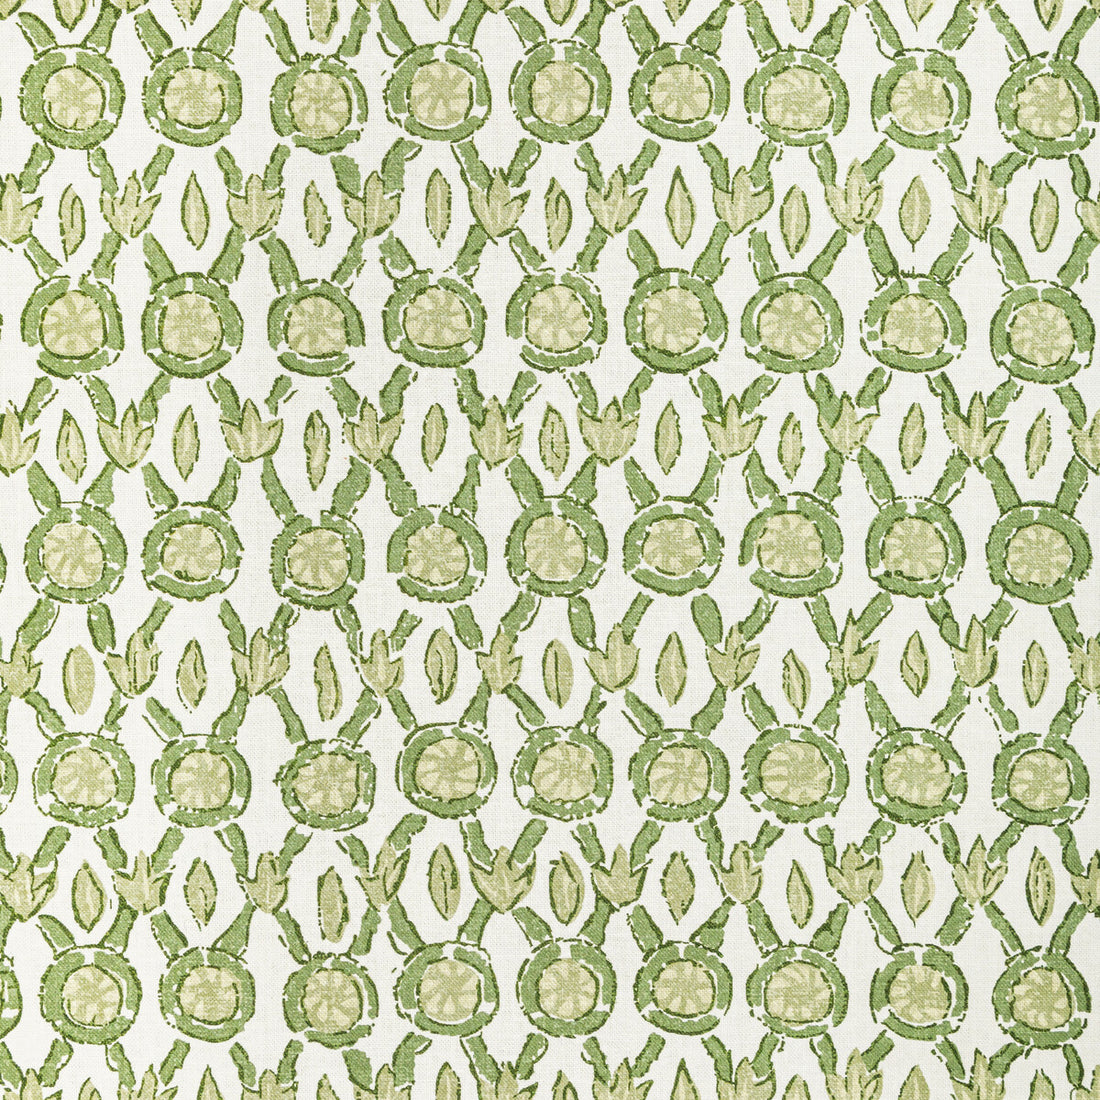 Galon Print fabric in leaf color - pattern 8022103.33.0 - by Brunschwig &amp; Fils in the Manoir collection